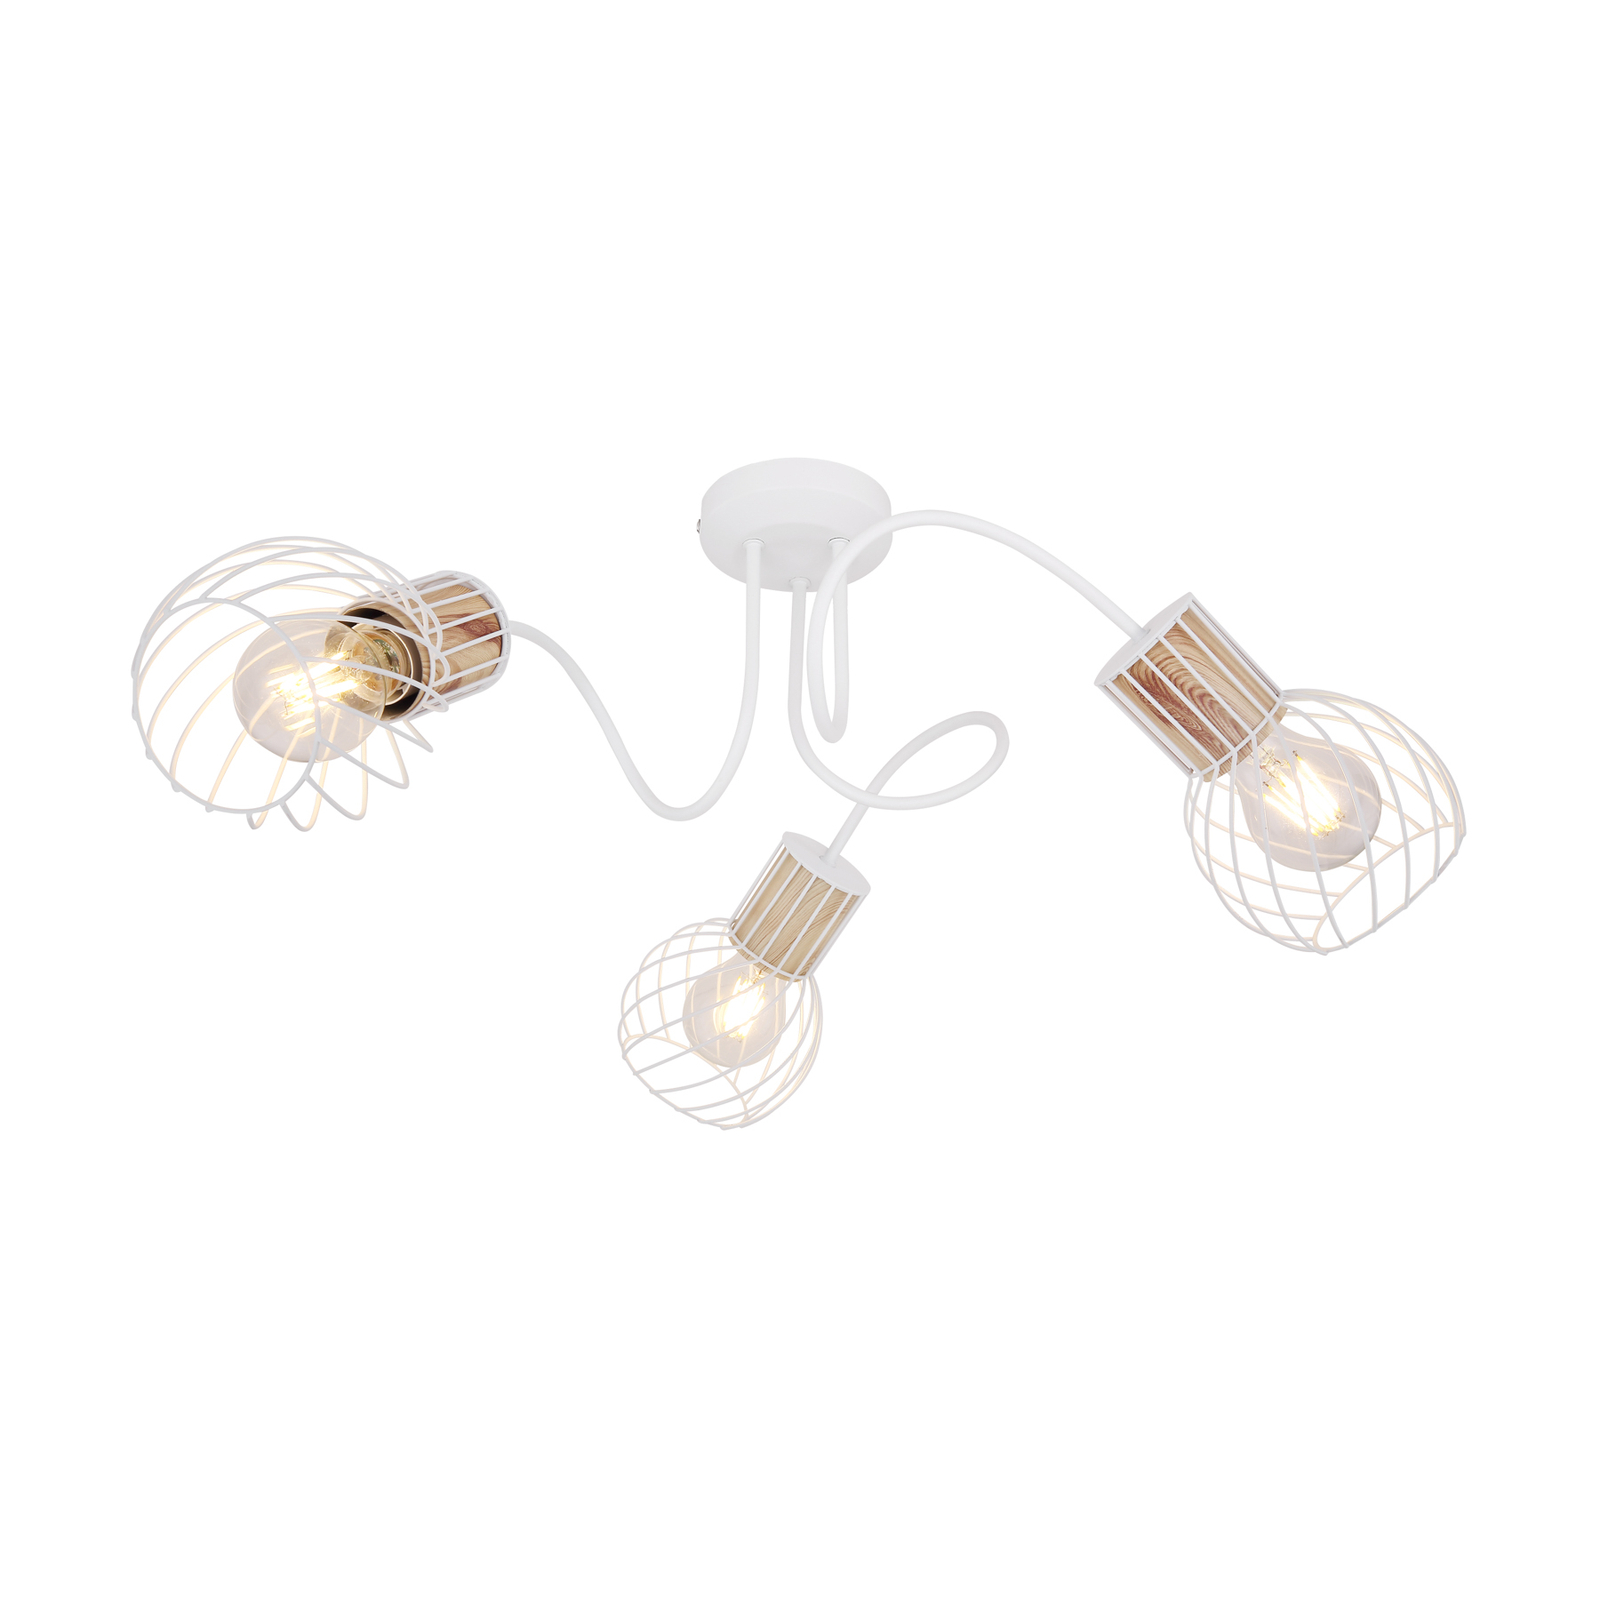 Luise ceiling light, white, wooden look, 3-bulb